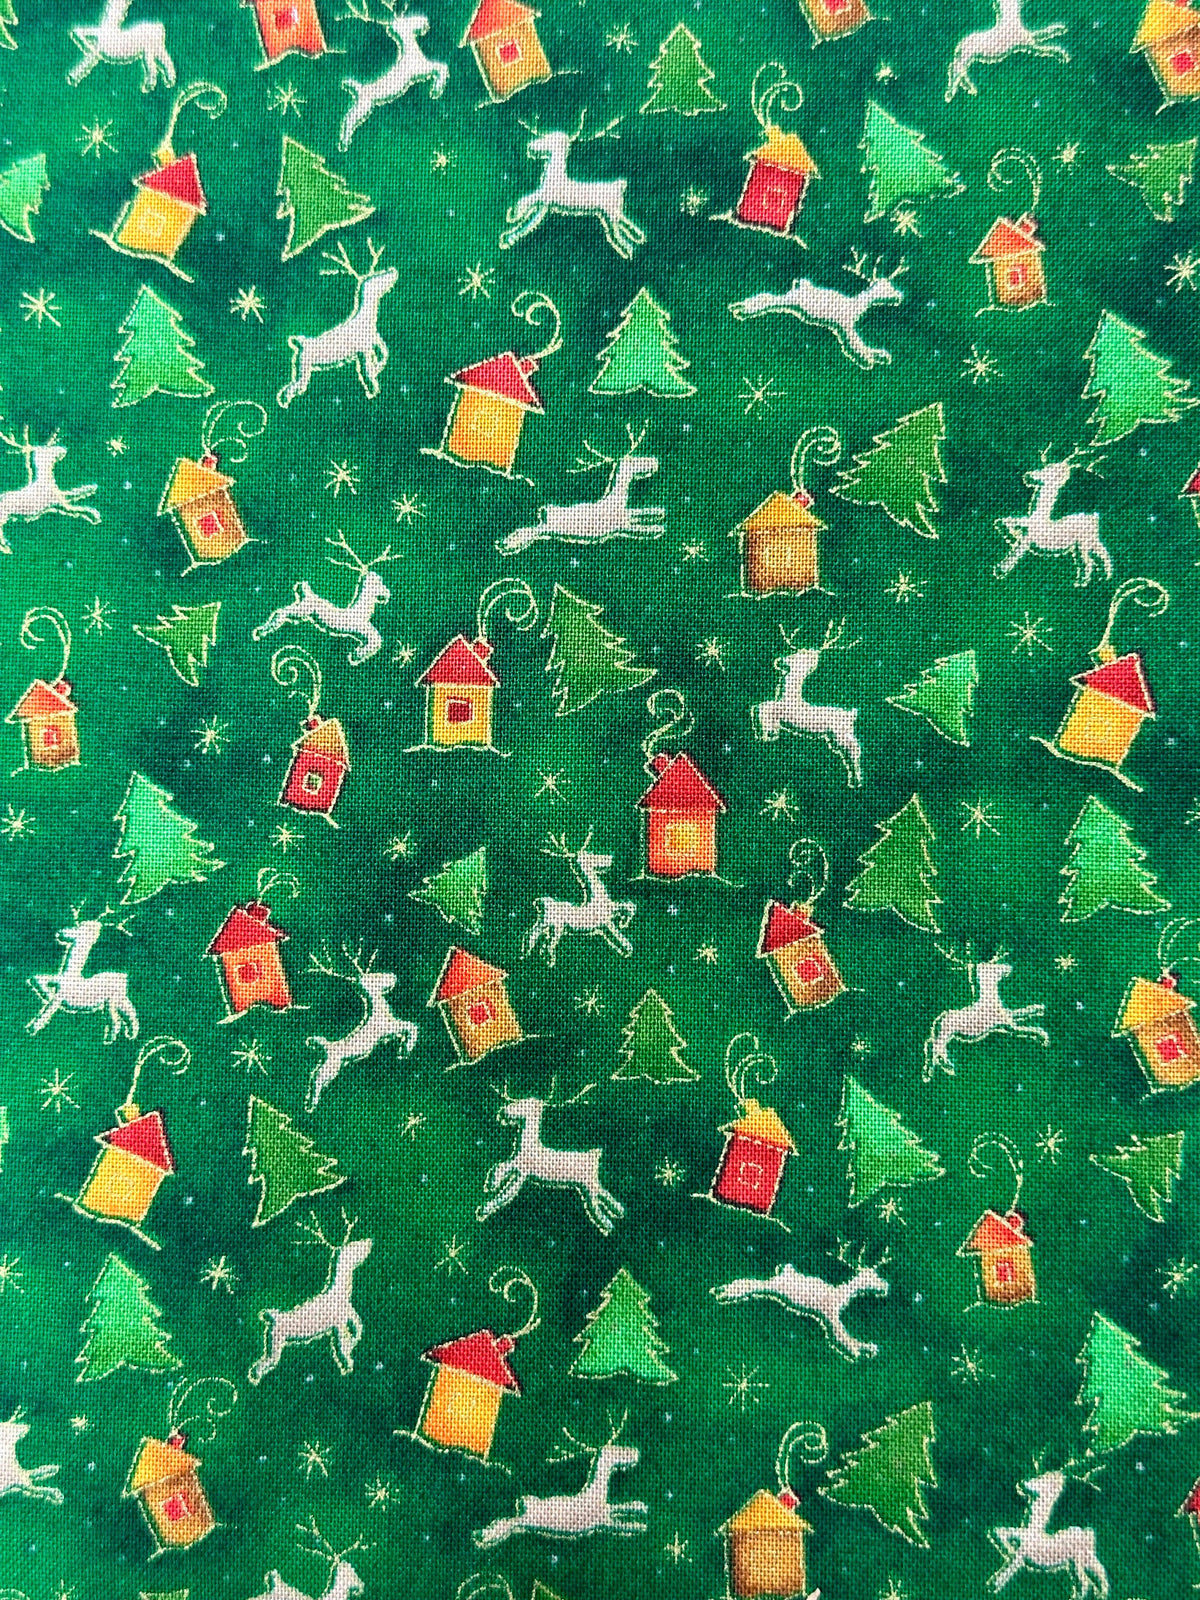 A green fabric with deer and houses on it, perfect for a Reindeer Square Dance Skirt from Square Up Fashions.